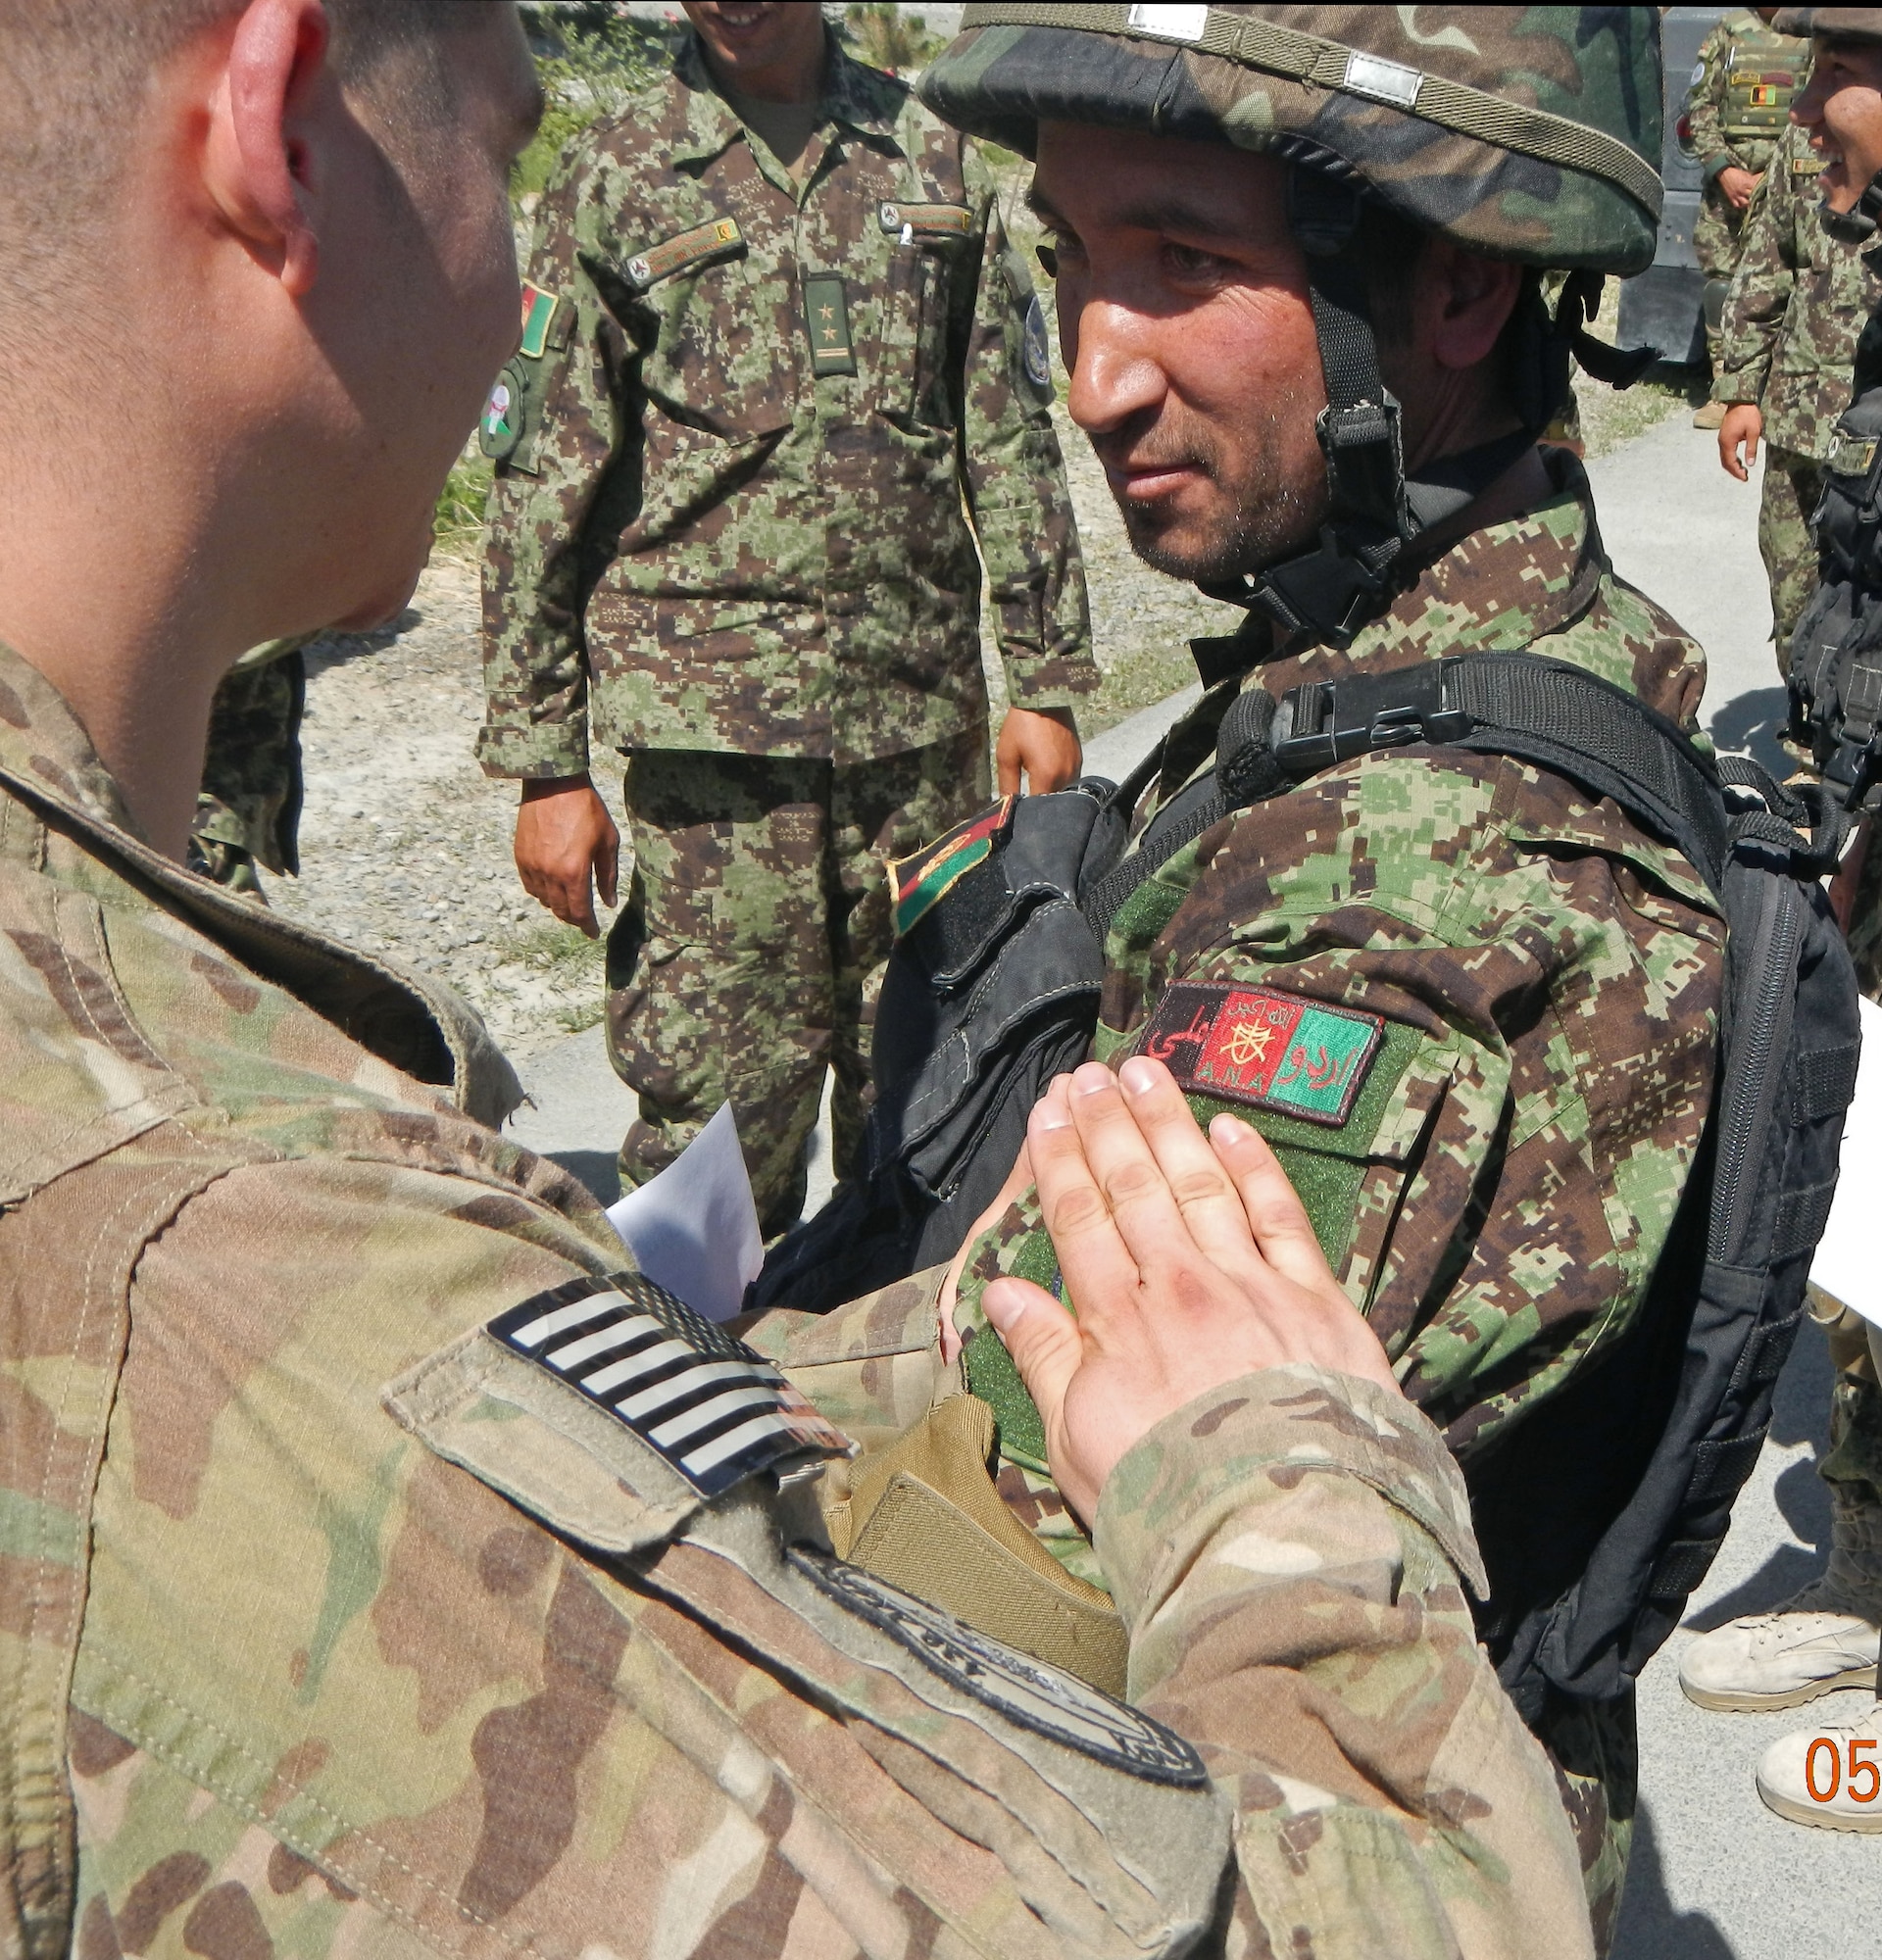 United States Air Force Capt. Michael Morriss, NATO Air Training Command-Afghanistan security forces advisors, gives a new Quick Reaction Force graduate his QRF patch in a ceremony May 29, 2013 at Kabul International Airport, Afghanistan. Fourteen AAF members of the KAW QRF Company graduated from a 50-hour Ground Combat Skills Course. The graduation marked the completion of advanced upgrade training for the members of the QRF Company. The team trained on numerous types of procedures including mounted and dismounted operations, military operations in urban terrain, close quarters battle, building clearing, entry control point operations, combat lifesaver and advanced M-16 utilization. (U.S. Air Force photo/Staff Sgt. Chris McAleer)